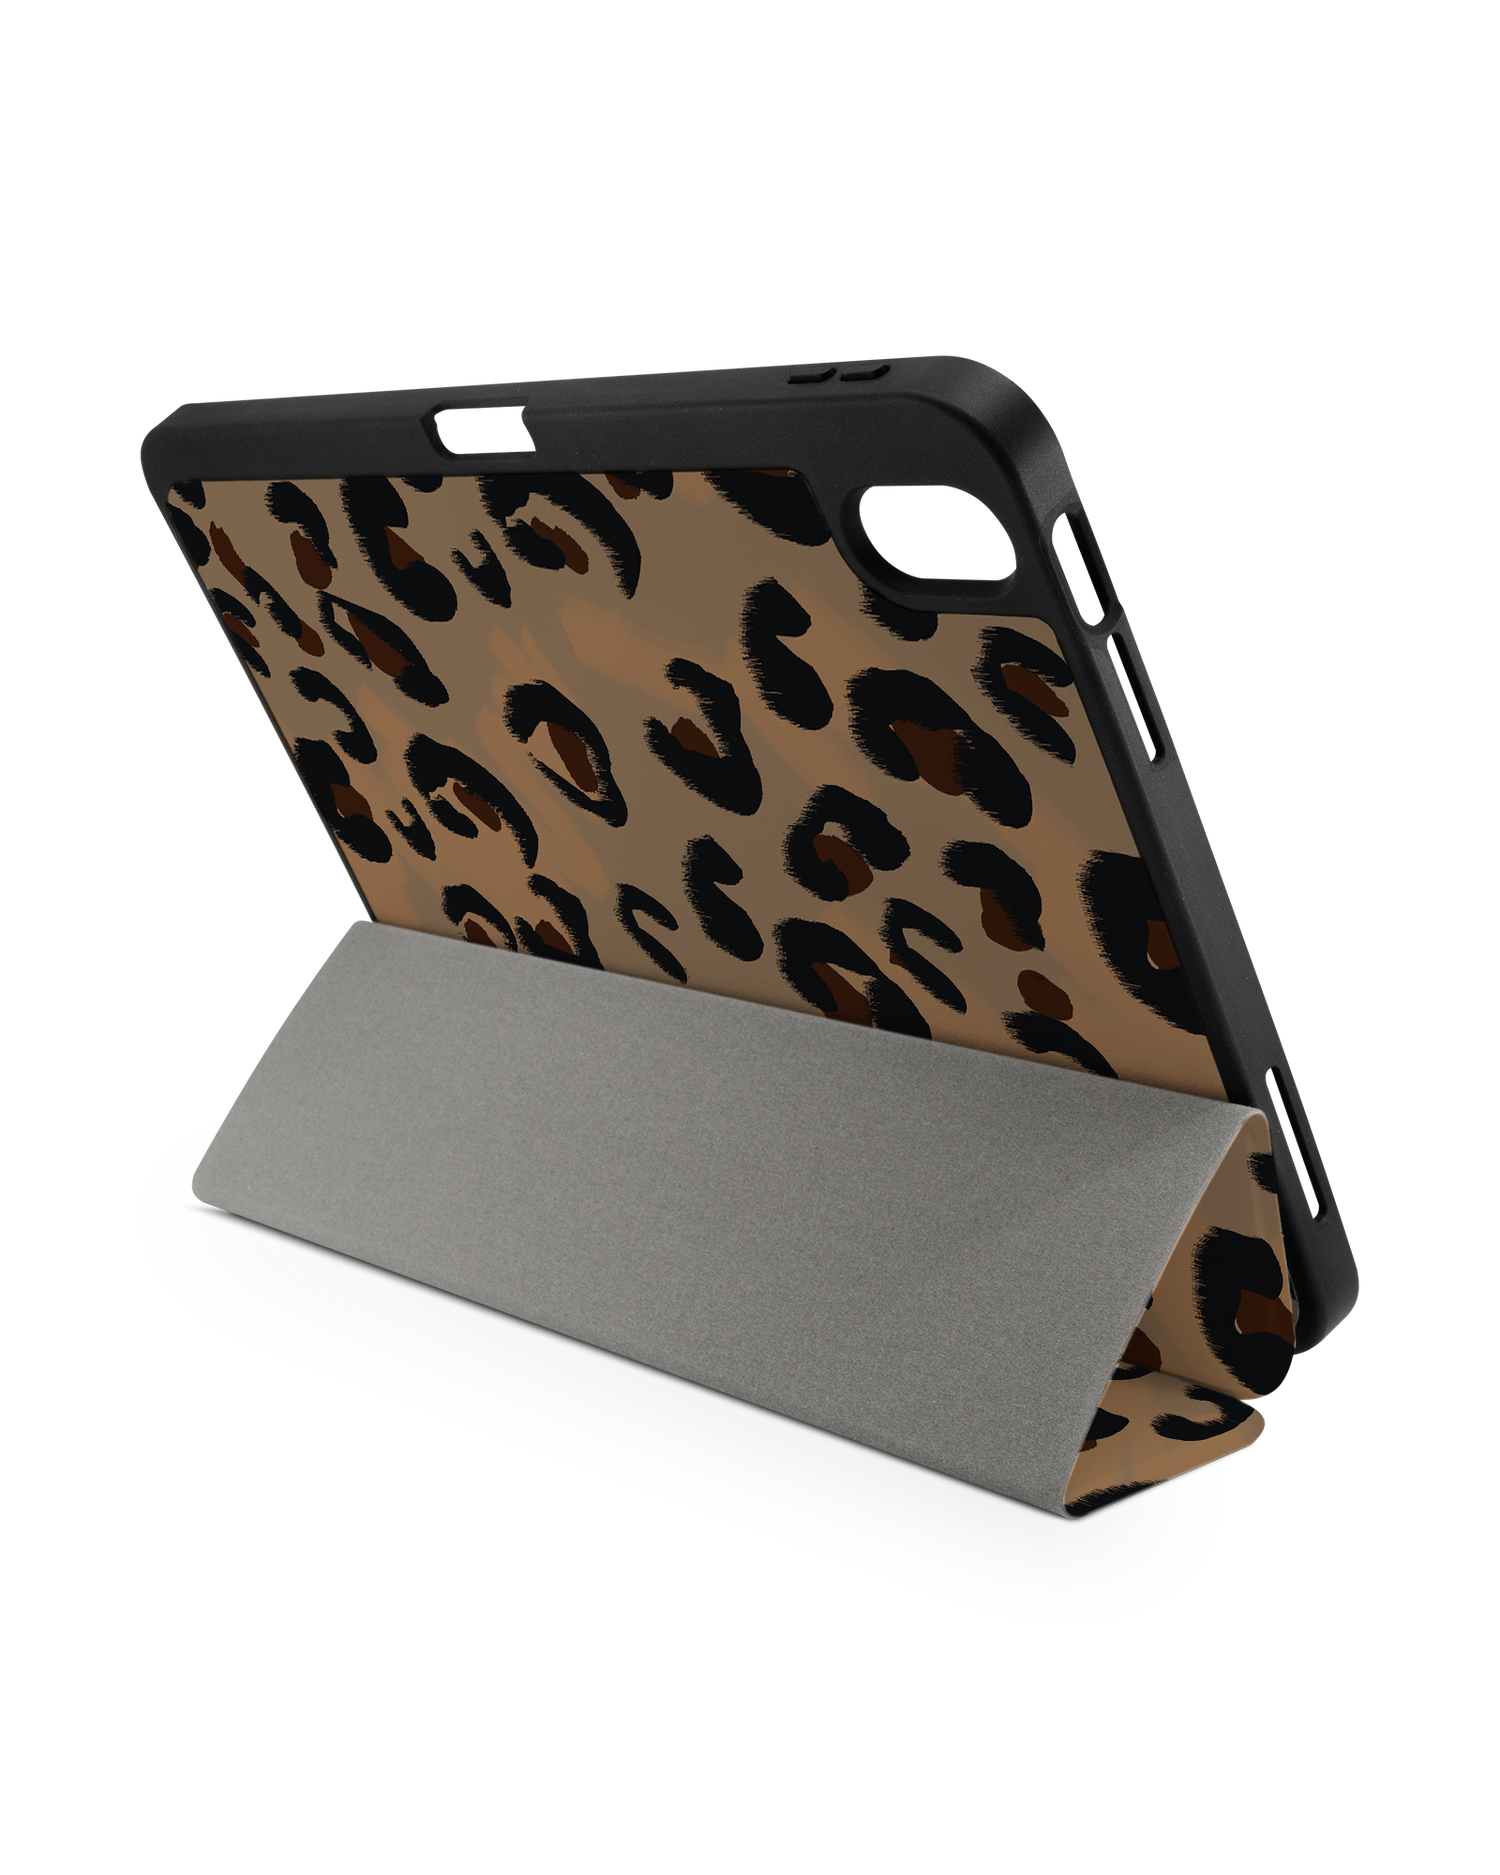 Leopard Repeat iPad Case with Pencil Holder for Apple iPad (10th Generation): Set up in landscape format (back view)